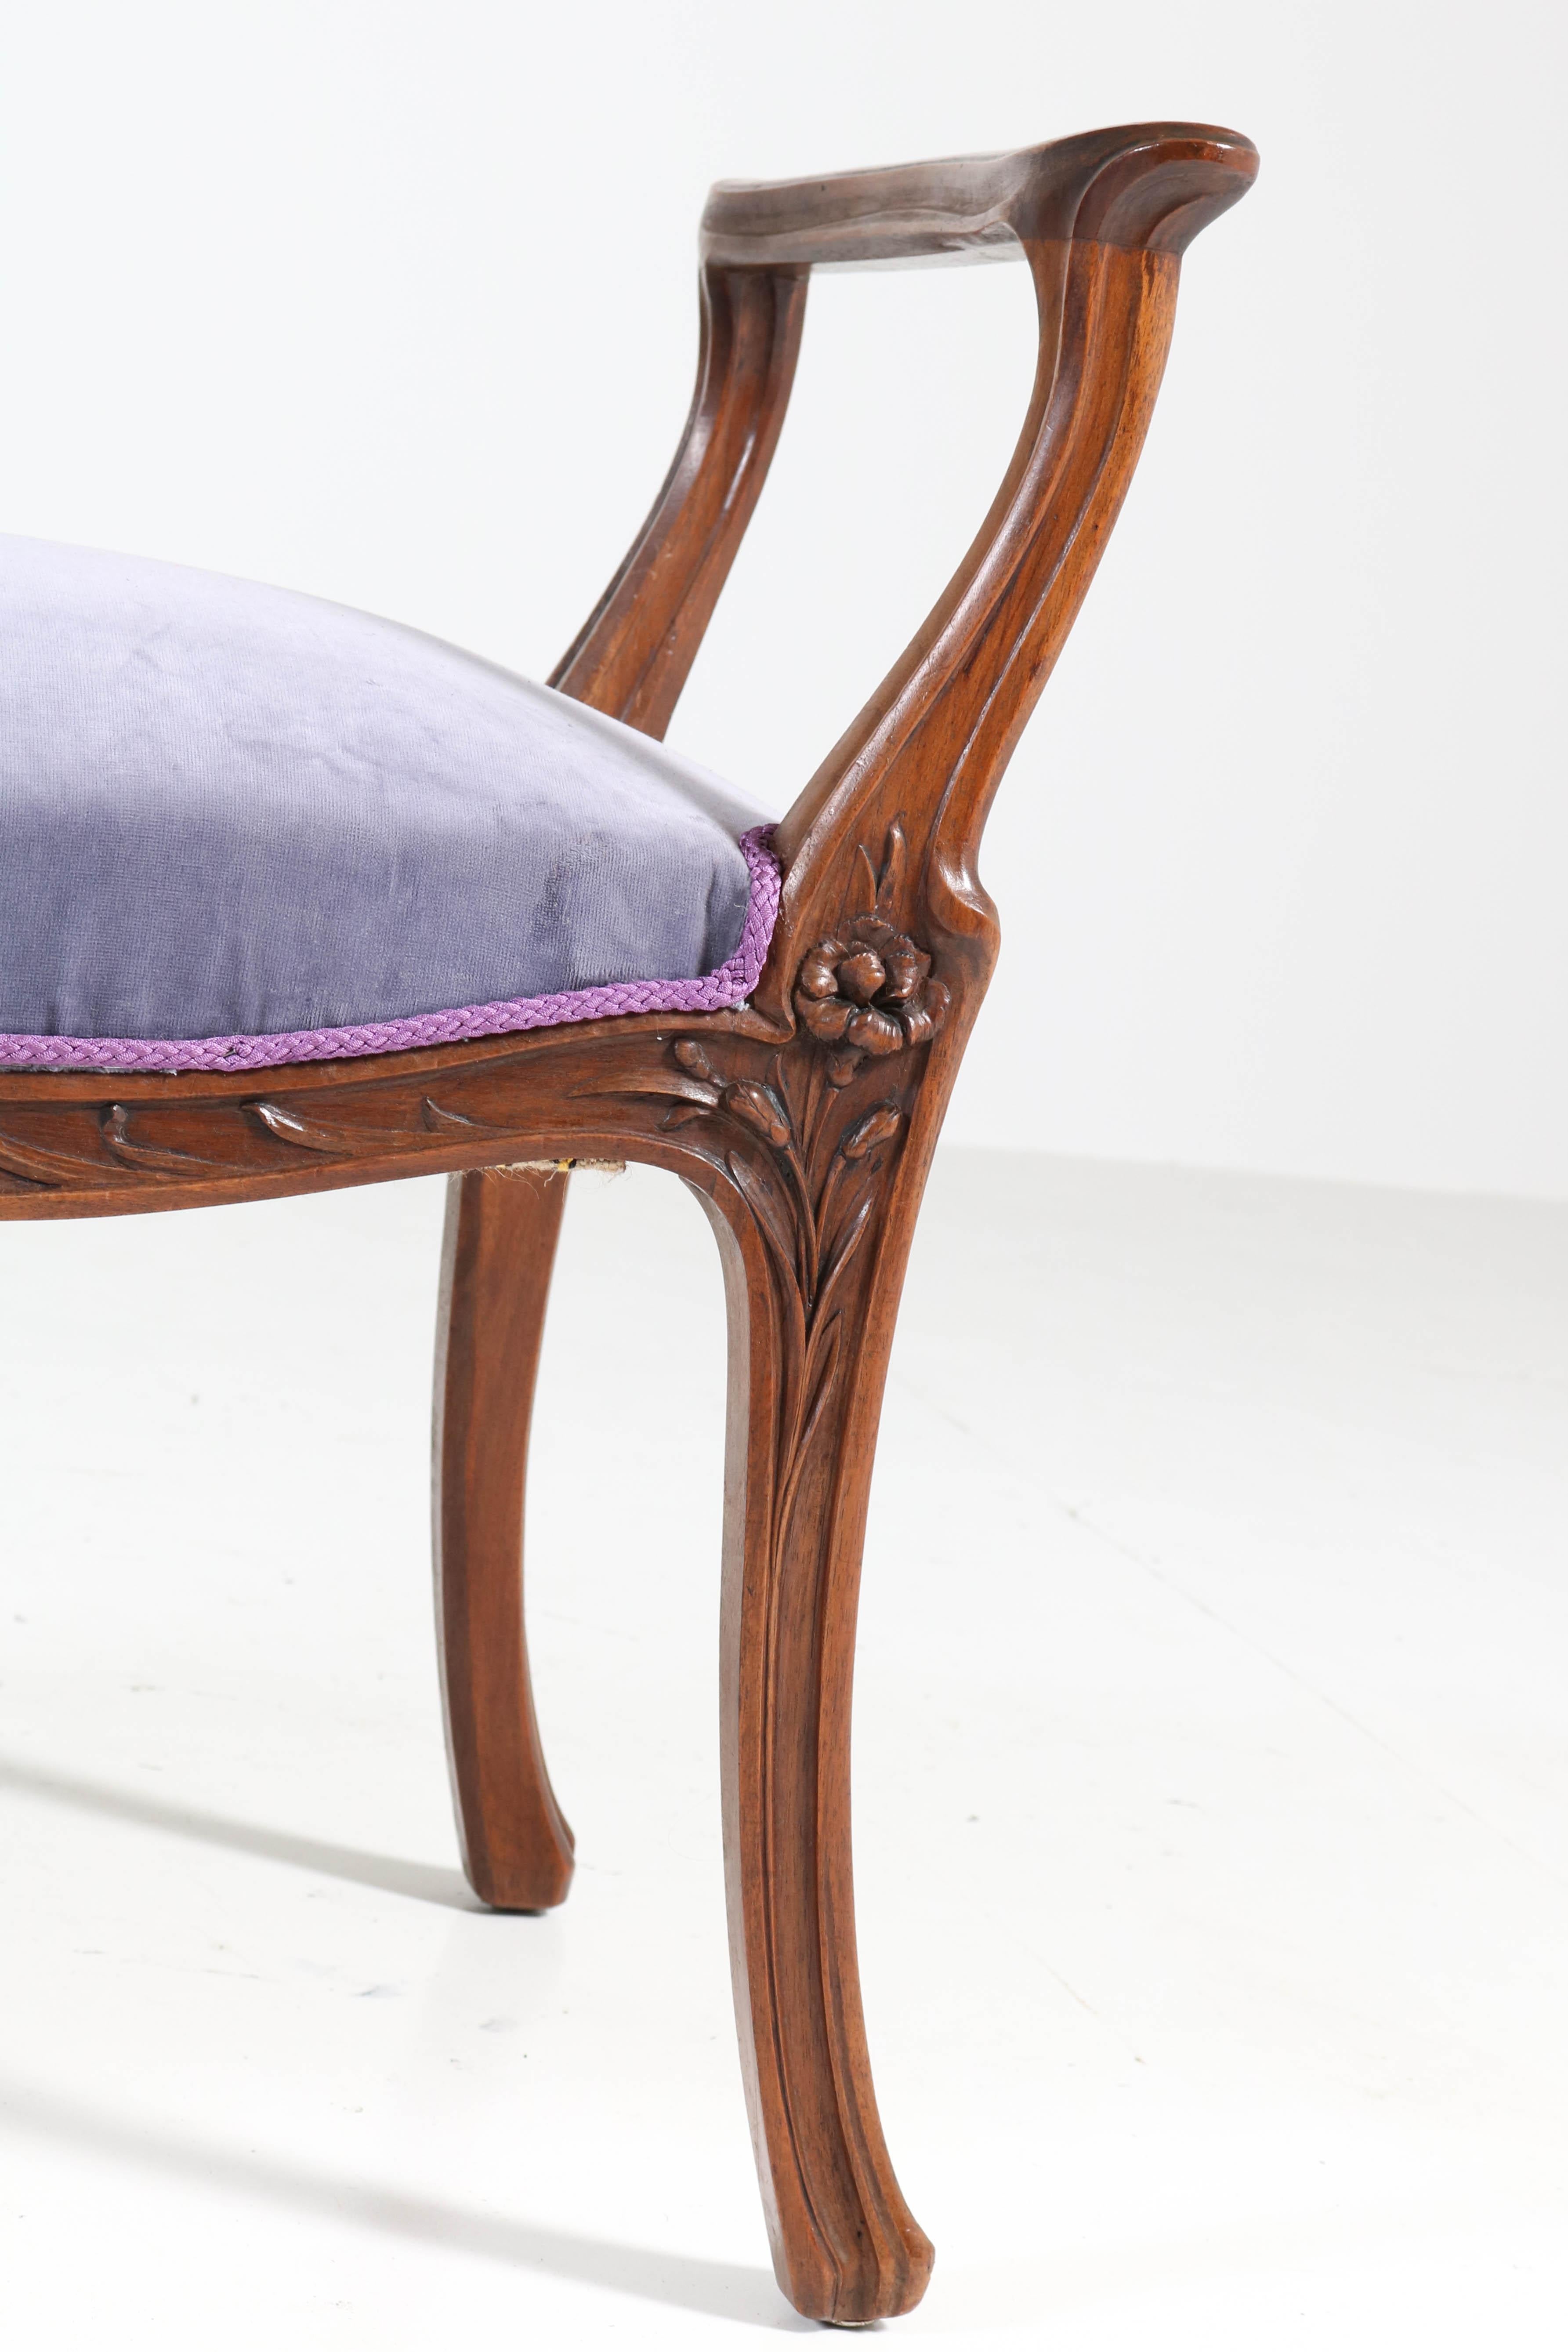 Early 20th Century French Walnut Art Nouveau Bench or Stool with Armrests, 1900s